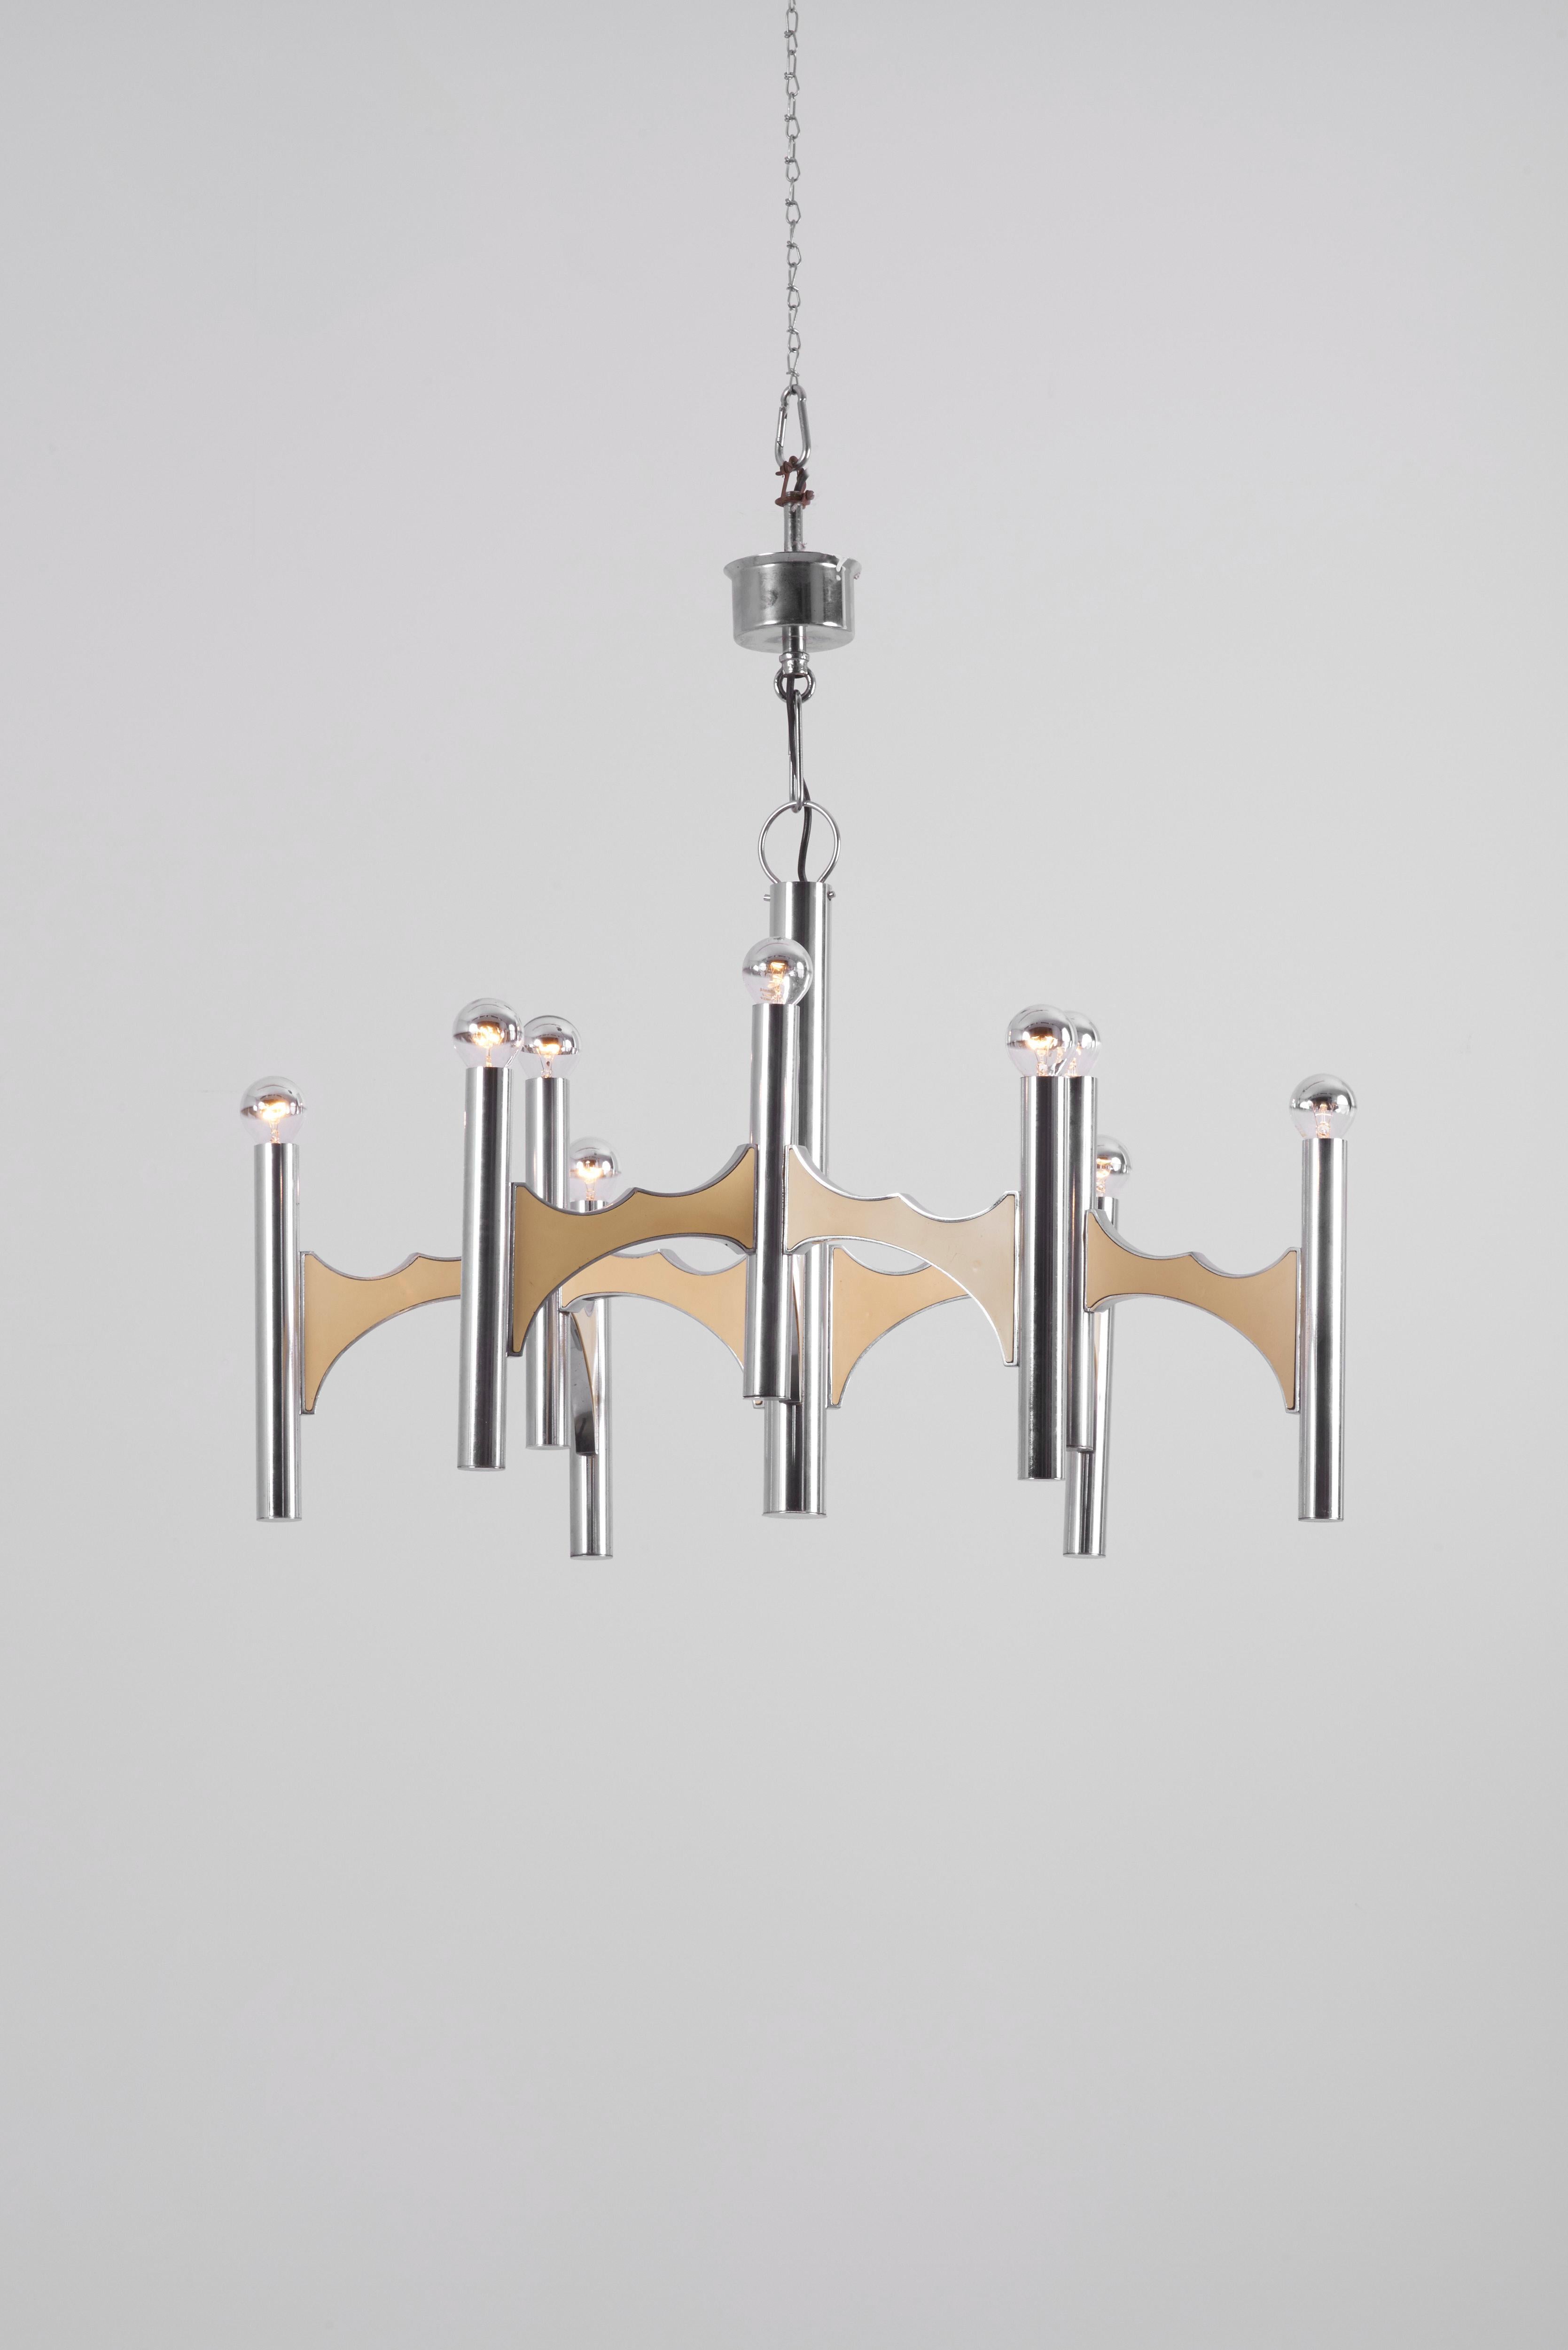 Chandelier in chrome with beige lacquer designed by Gaetano Sciolari.

9 x E14 sockets.

Please note: Lamp should be fitted professionally in accordance to local requirements.